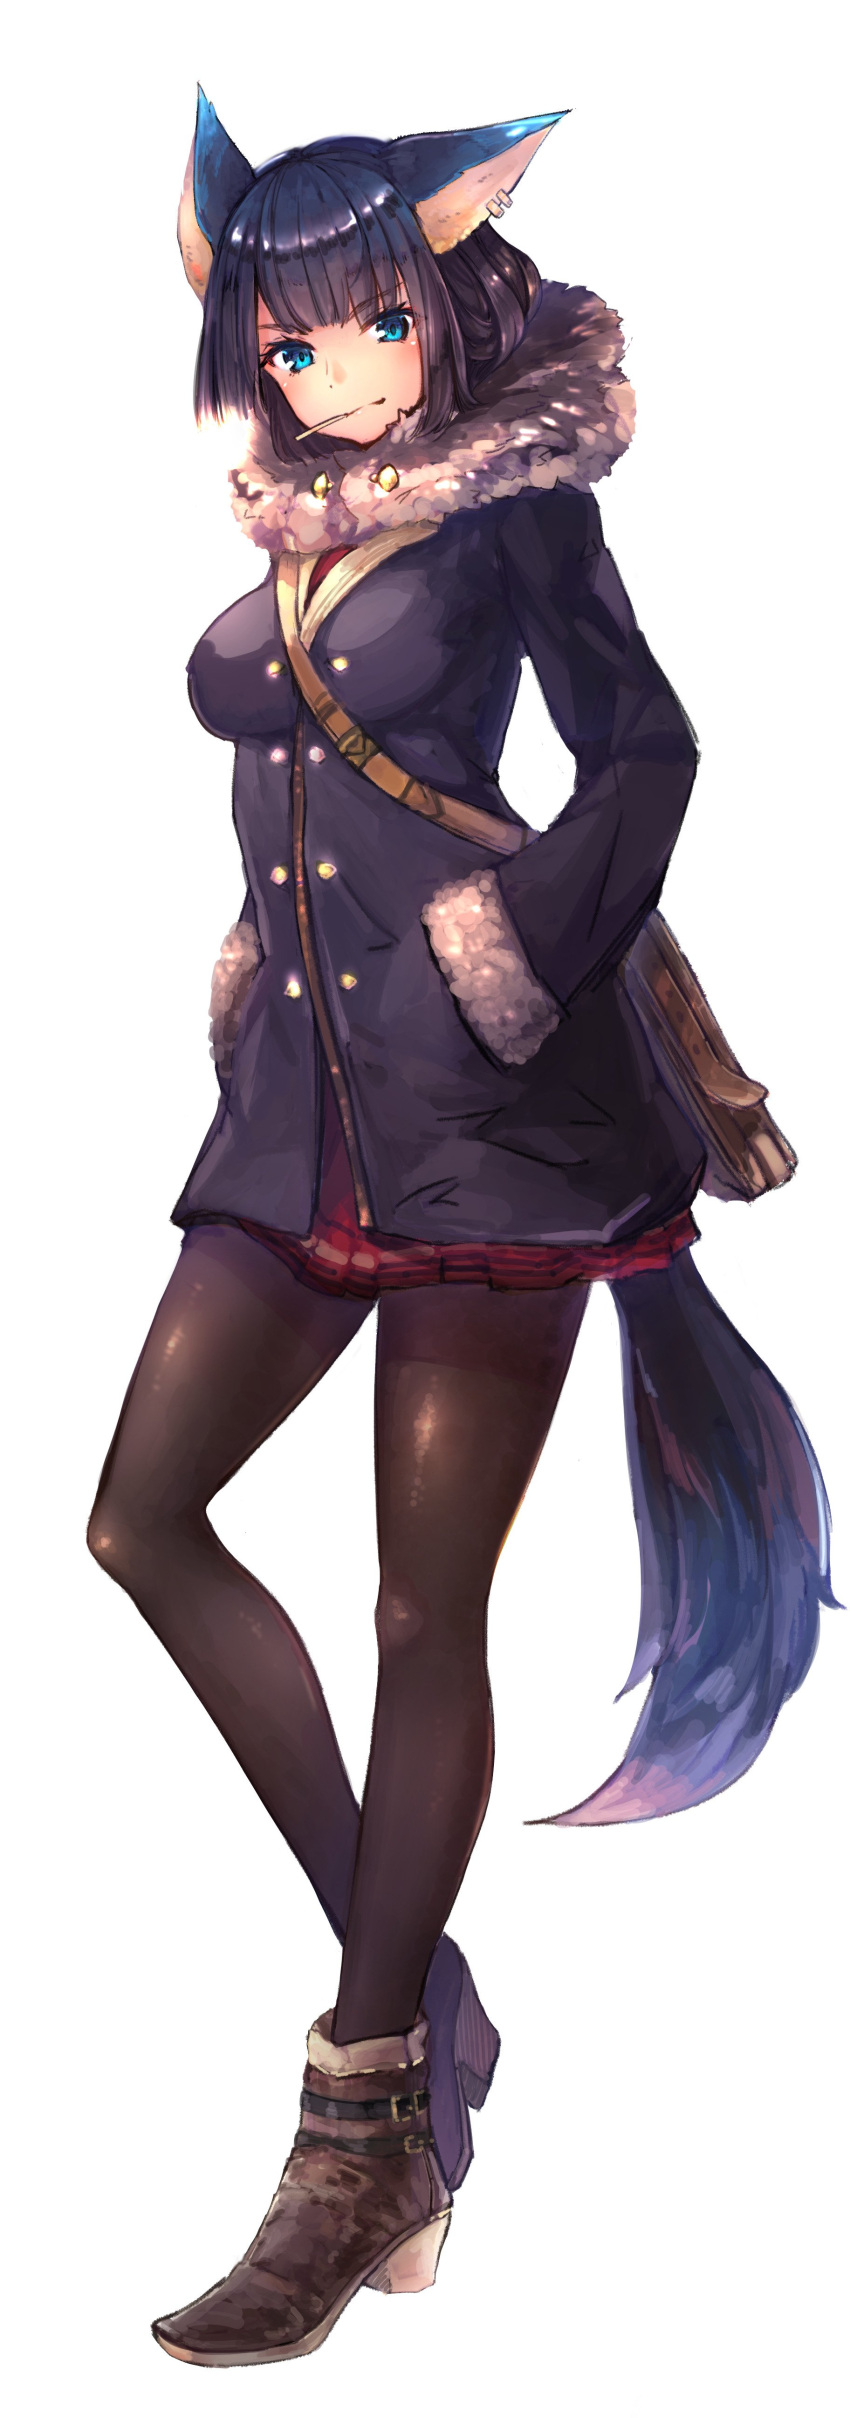 1girl absurdres animal_ears bag black_hair black_legwear blue_eyes earrings full_body fur_coat hands_in_pockets highres jewelry looking_at_viewer original shoes short_hair simple_background skirt solo tail virus_(obsession) white_background winter_clothes